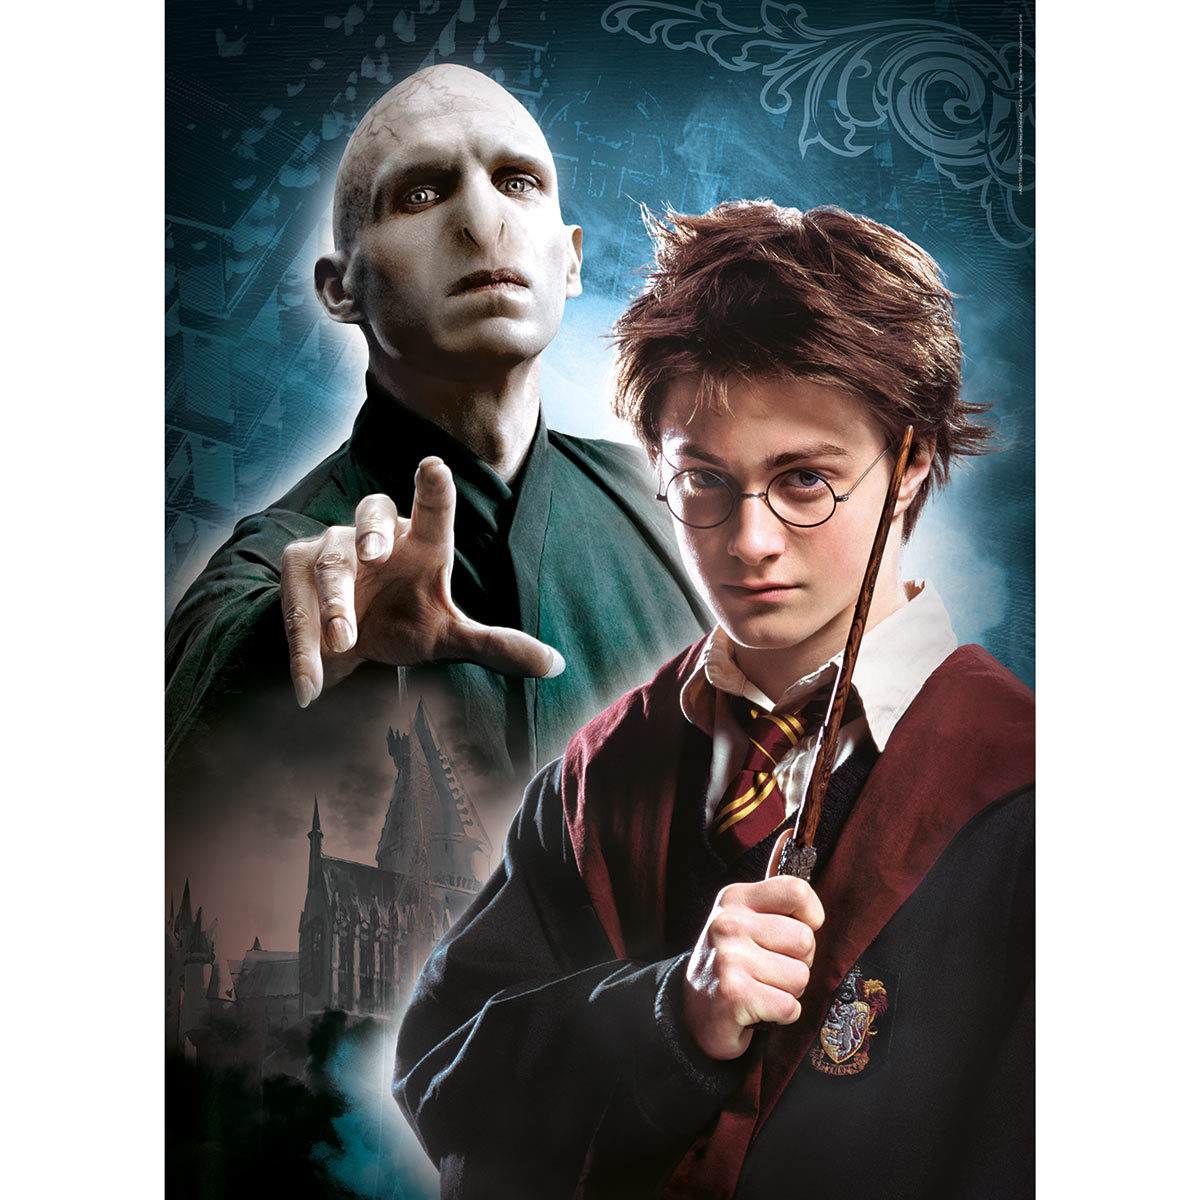 Harry Potter Licensed 3 x 1000 Piece Jigsaw Puzzle (14+ Years)